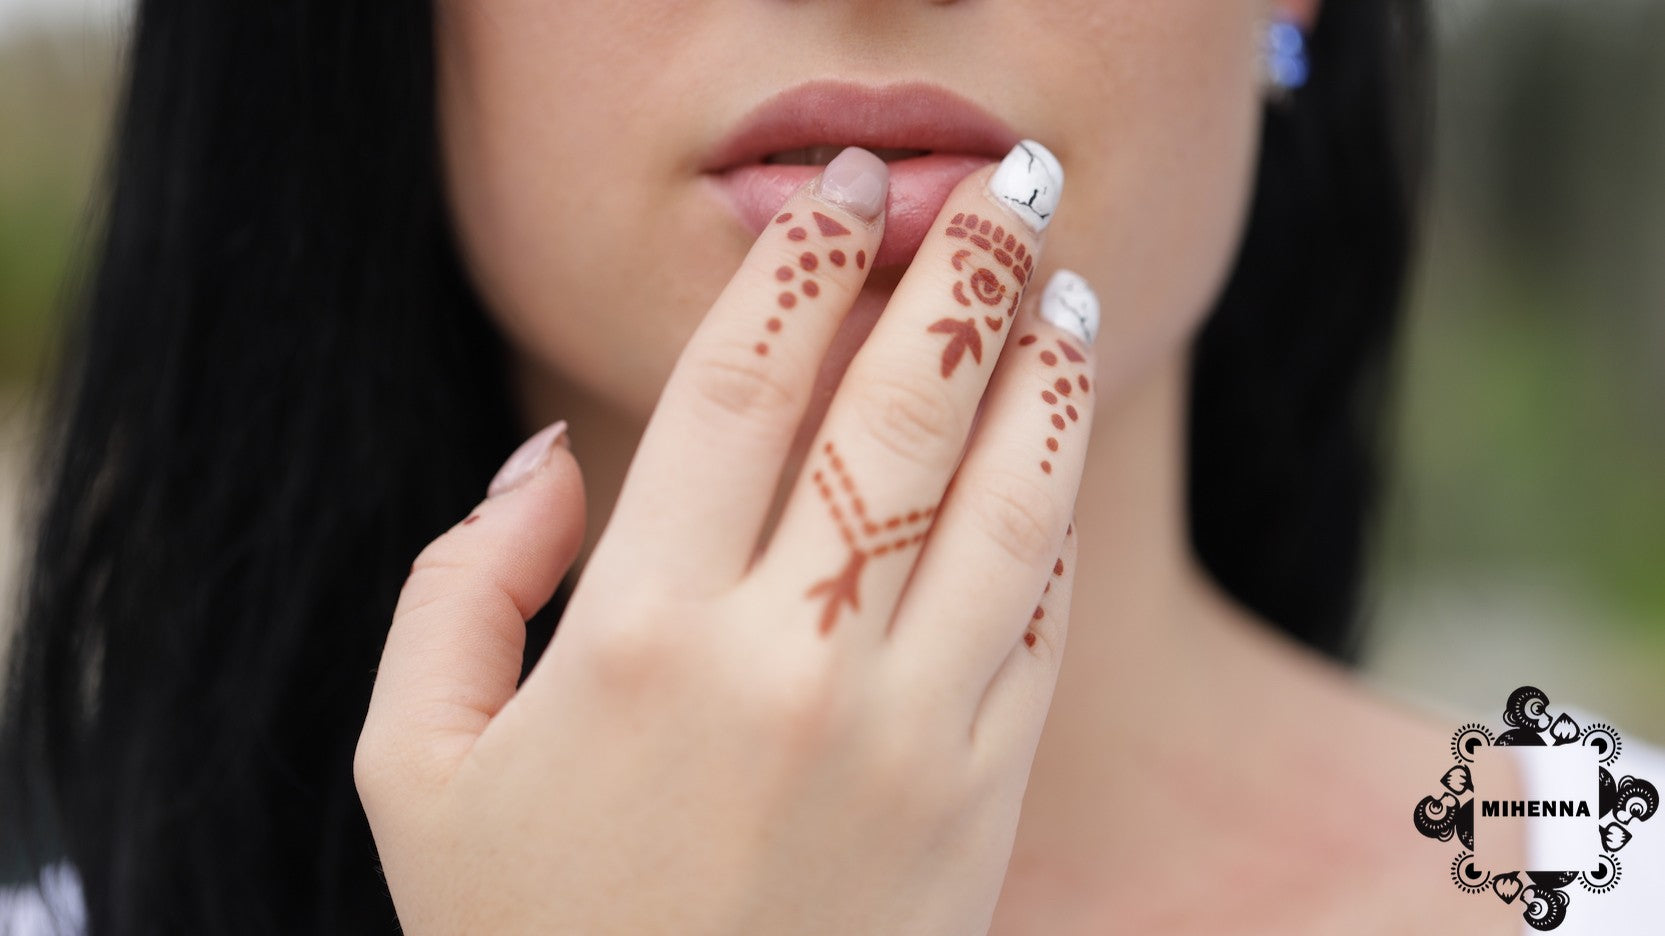 Henna jewelry - ring designs on woman's hand by Mihenna